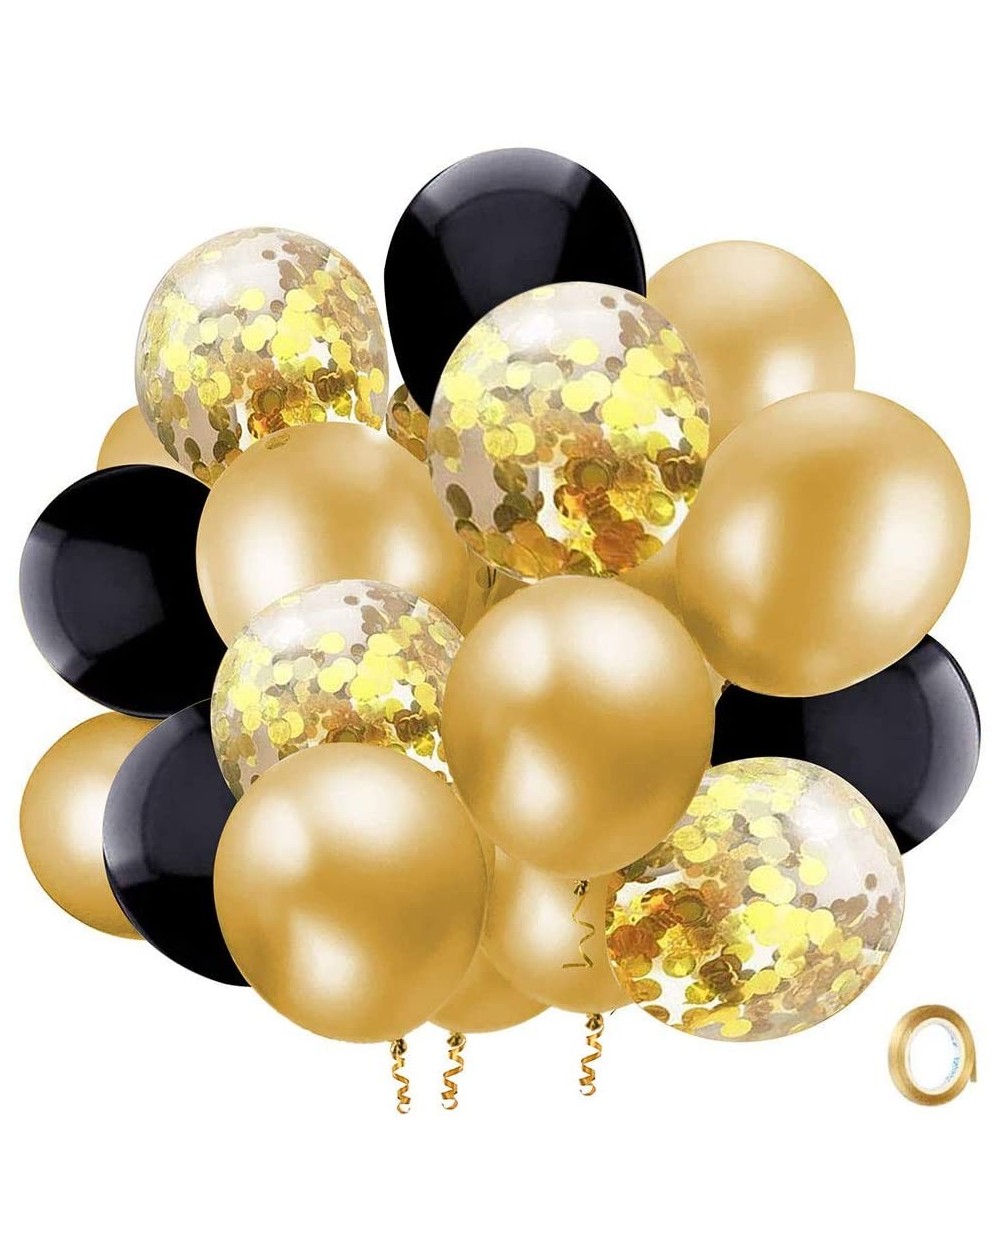 Balloons Black Gold Confetti Latex Balloons- 50 Pack 12 inch Gold Metallic Party Balloons with 33 Feet Gold Ribbon for Kids P...